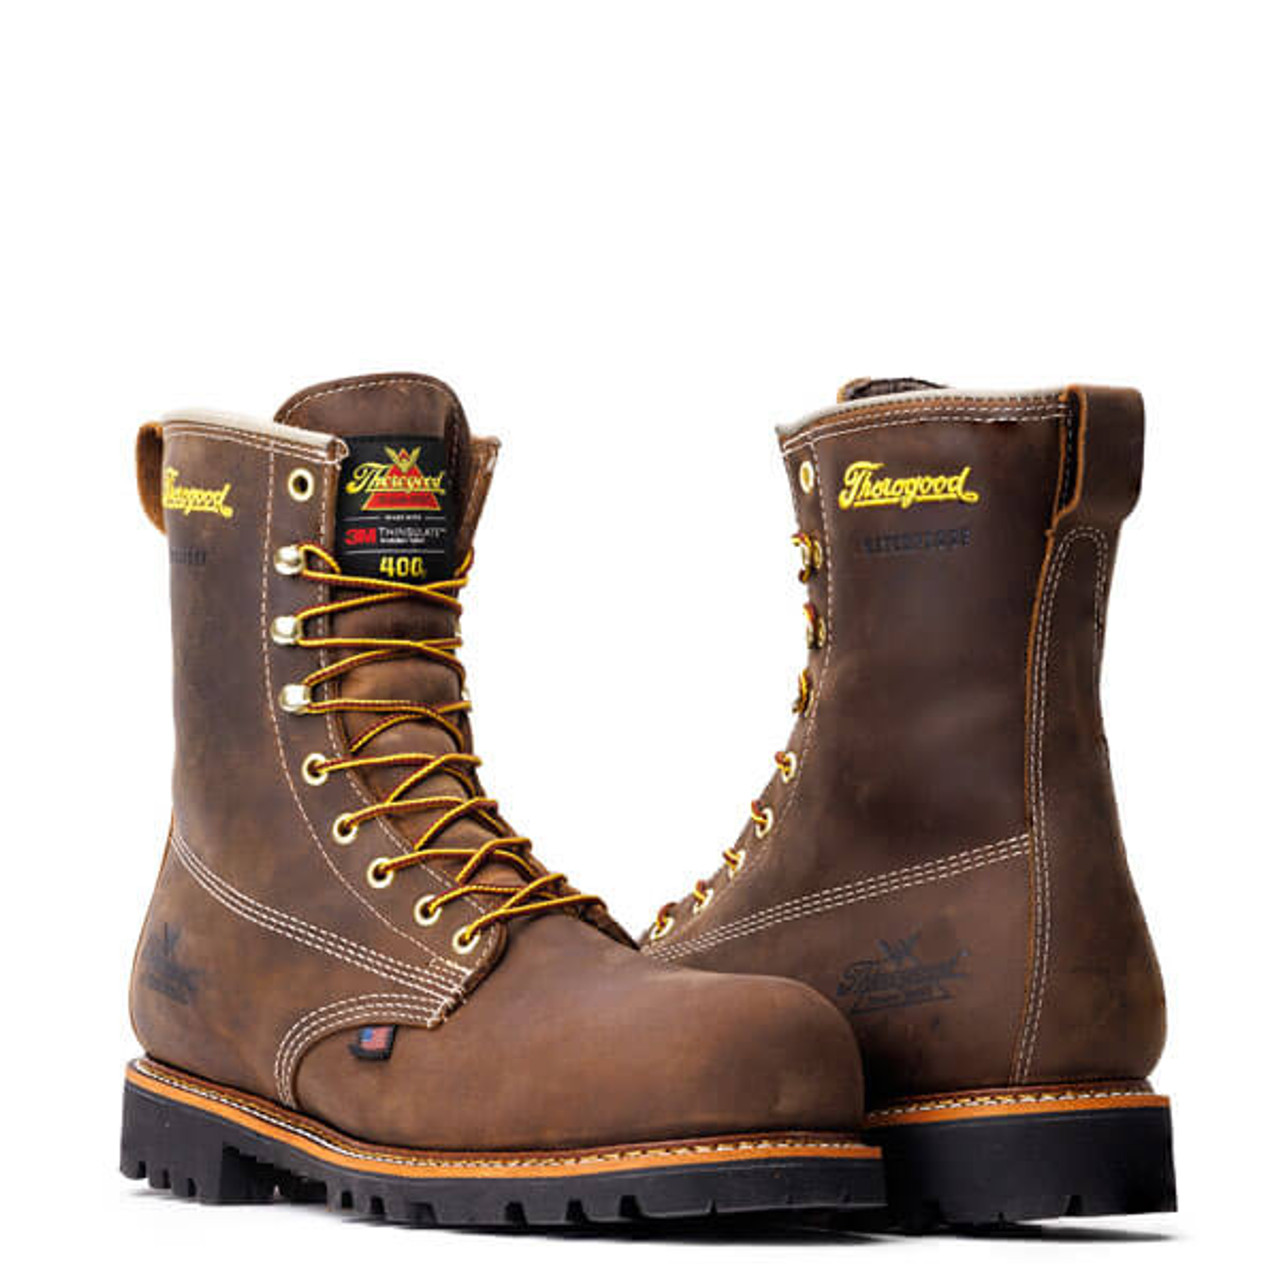 THOROGOOD AMERICAN LEGACY WATERPROOF 400G INSULATED 8” CRAZYHORSE NANO SAFETY TOE BOOTS 804-4520